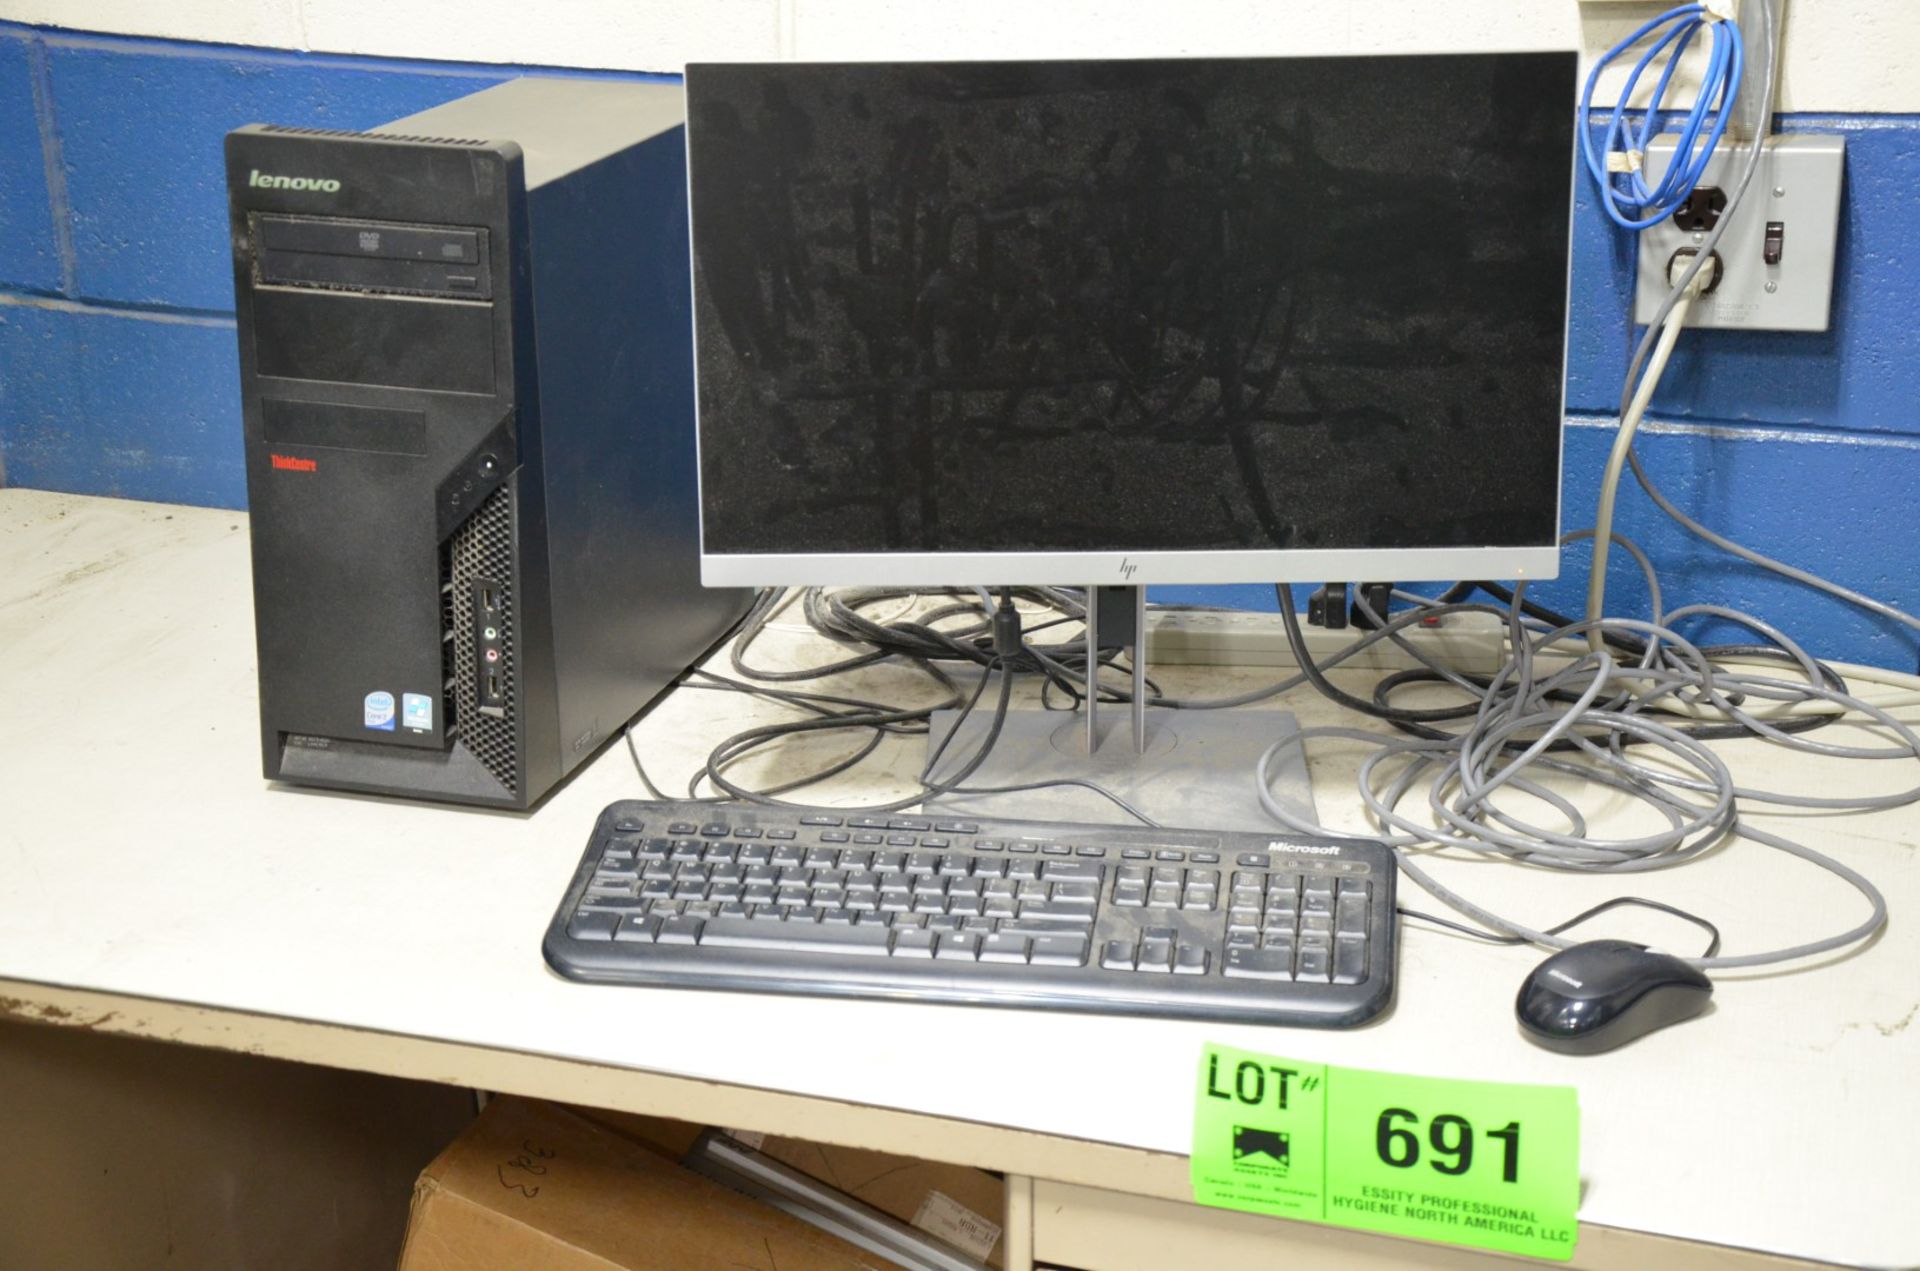 LOT/ LENOVO CONTROL PC WITH DESK [RIGGING FEE FOR LOT #691 - $100 USD PLUS APPLICABLE TAXES]